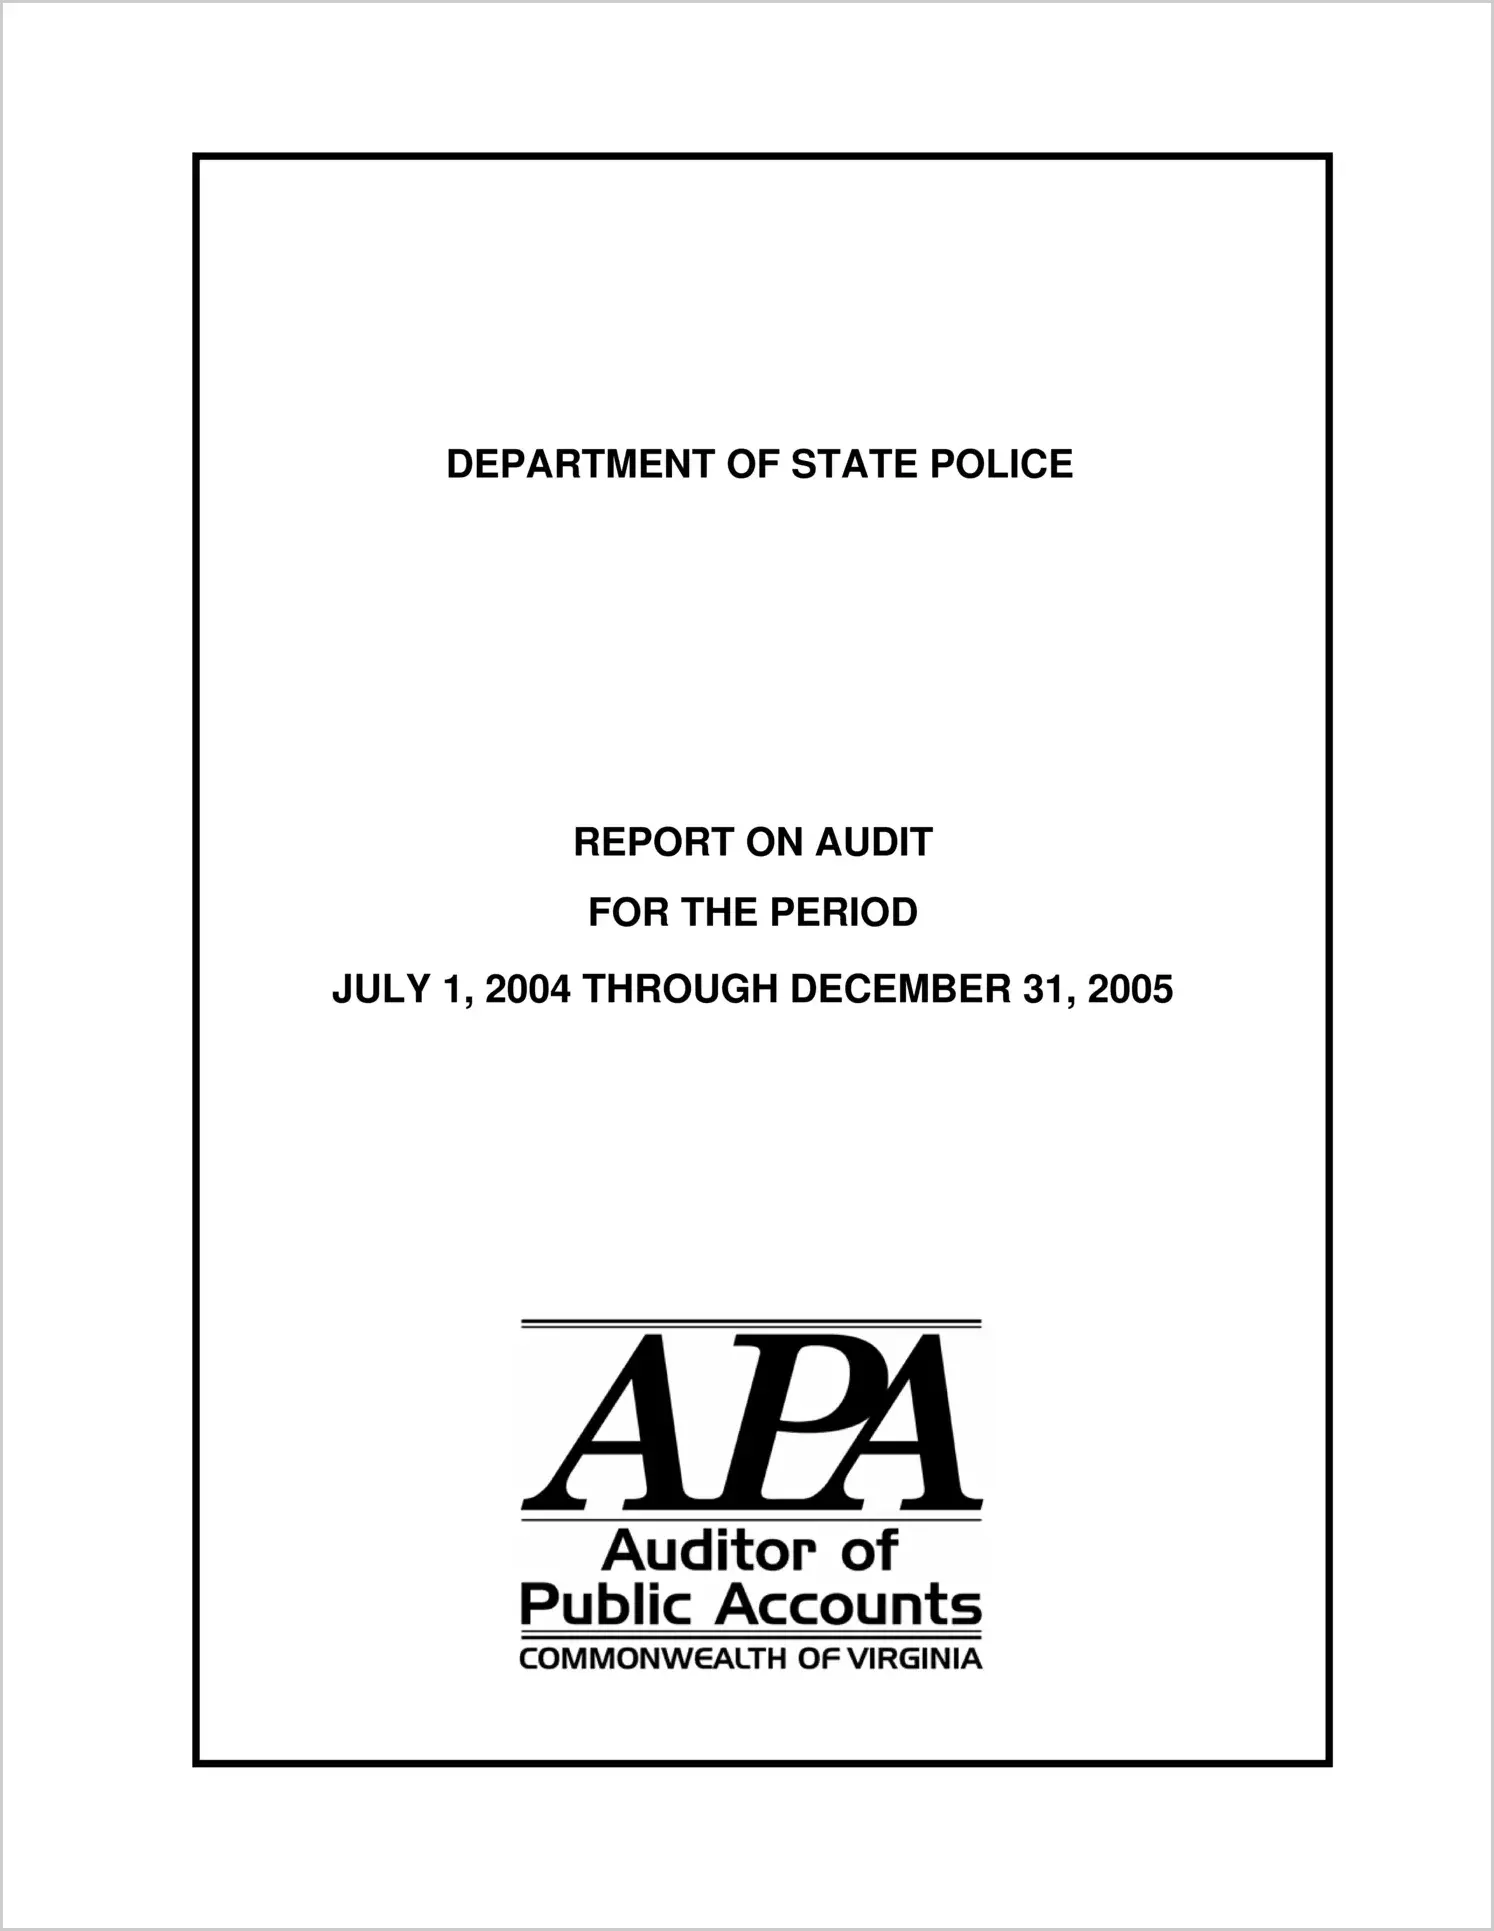 Department of State Police for the period July 1, 2004 through December 31, 2005